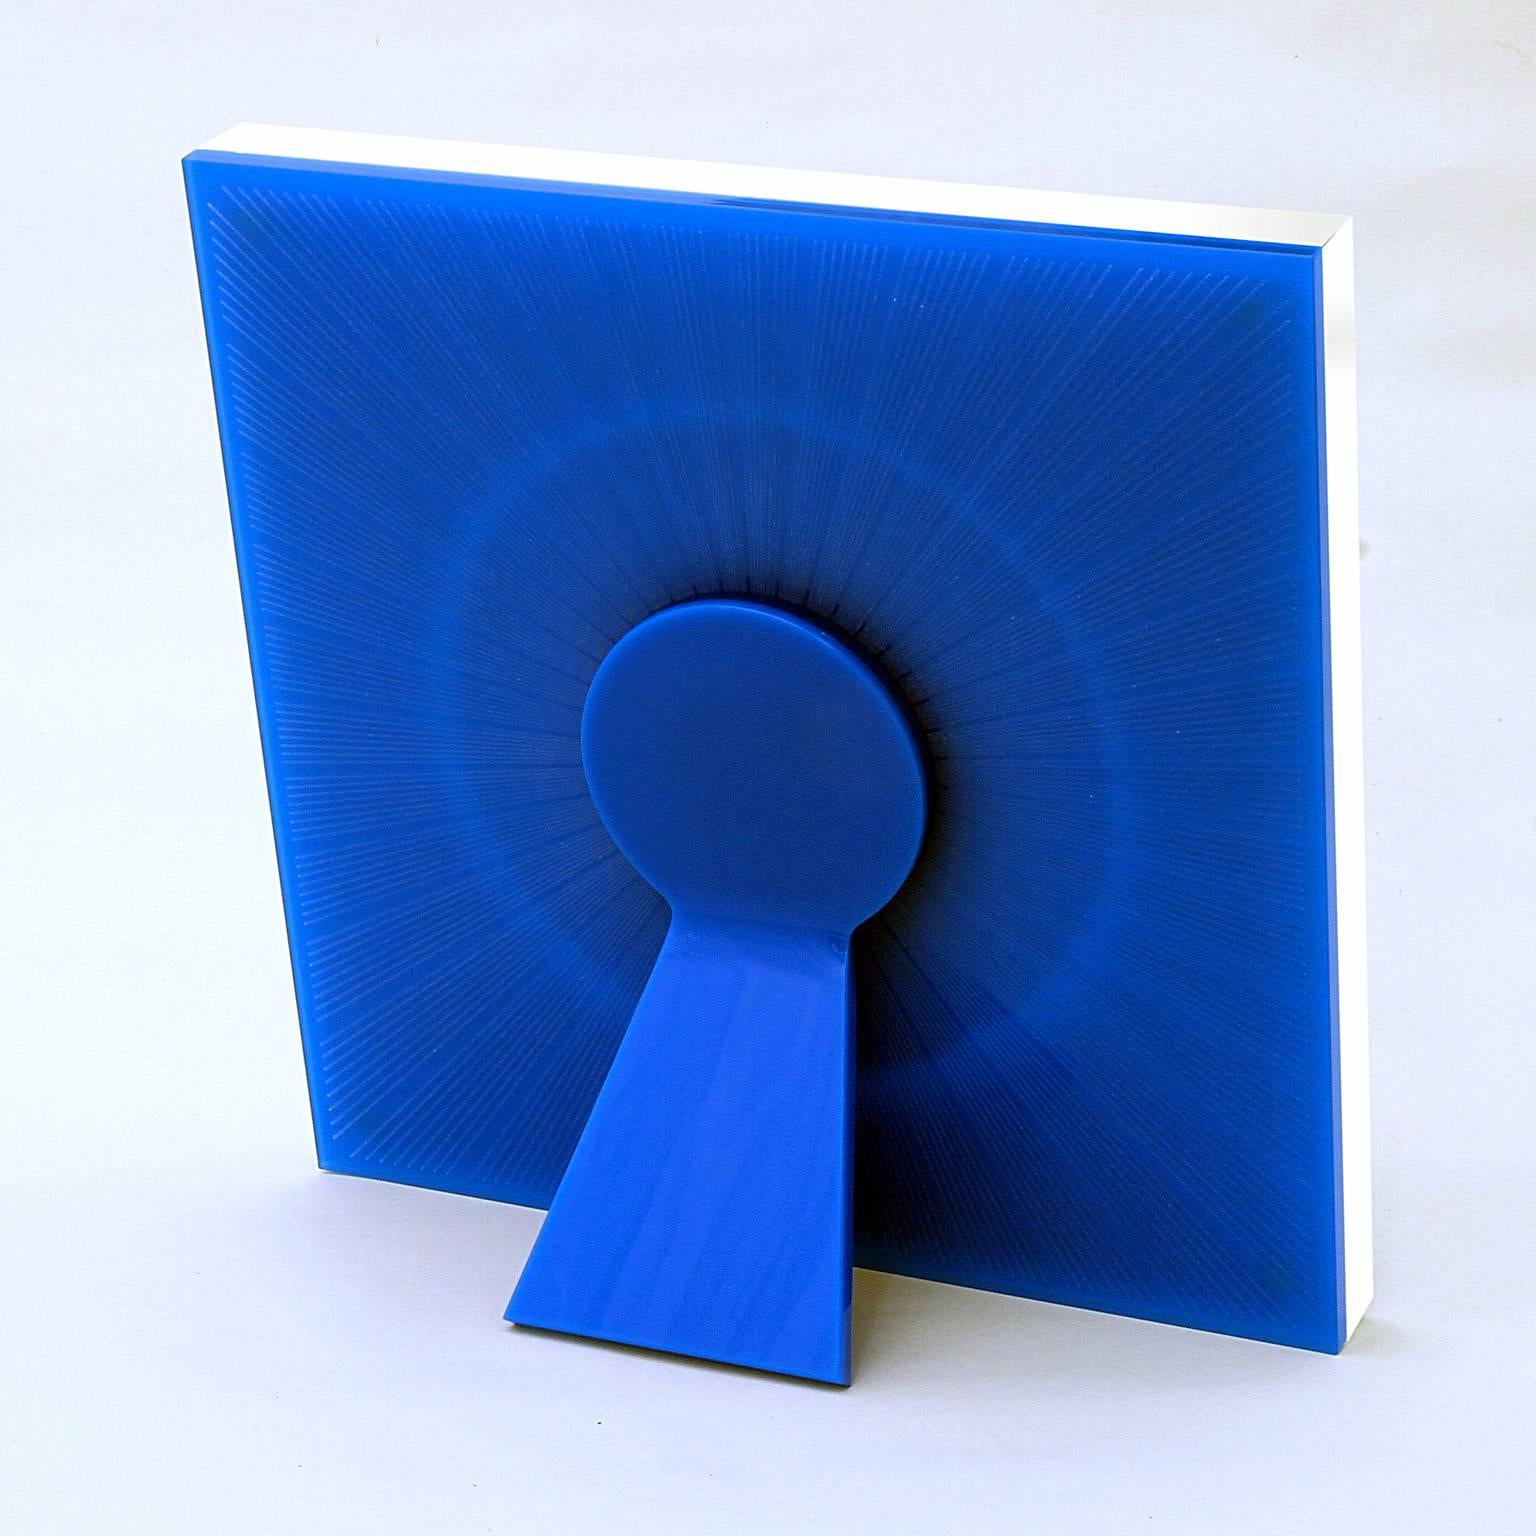 Model Sharing is a limited edition of Art with Heart collection of photoframes by Laura G , Italy. It is realized into metacrylates royal blue and White, with guillochè
rays handworked into metacrylate , giving light to the Whole piece.
Sharing